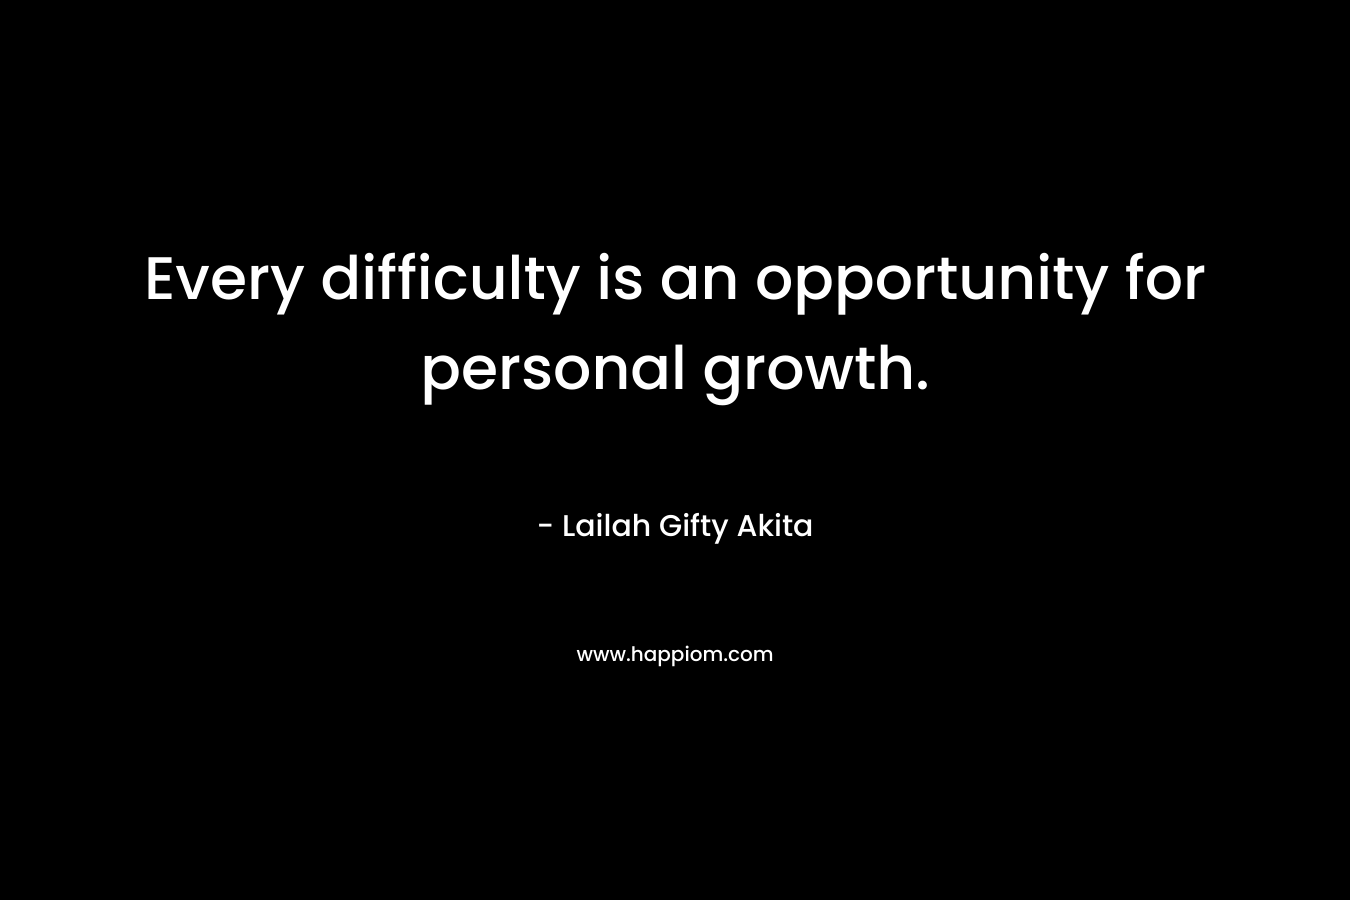 Every difficulty is an opportunity for personal growth.